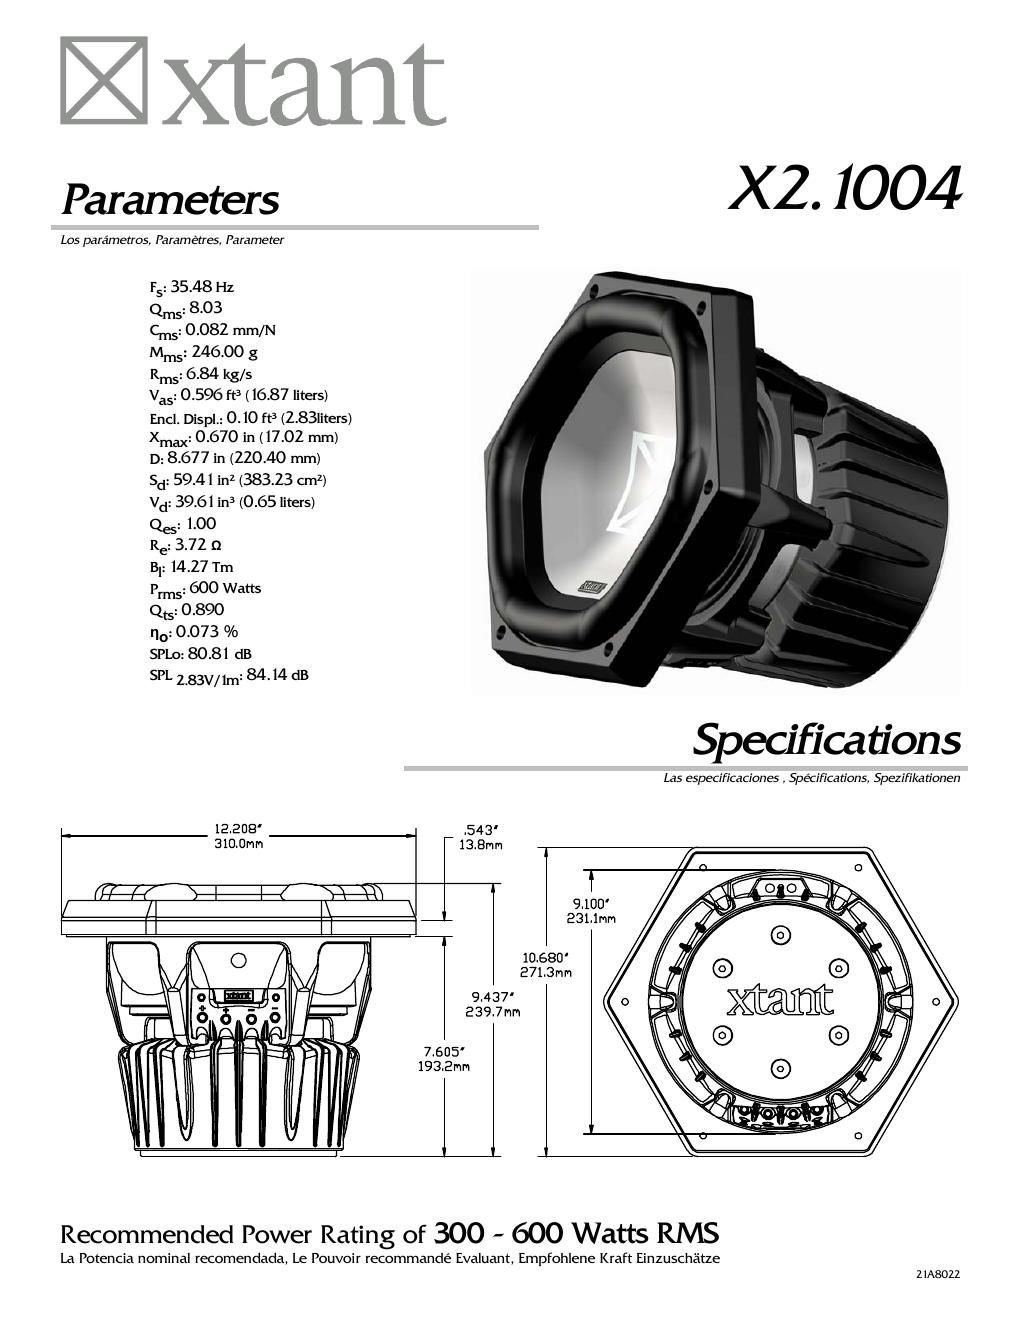 xtant x 2 1004 owners manual